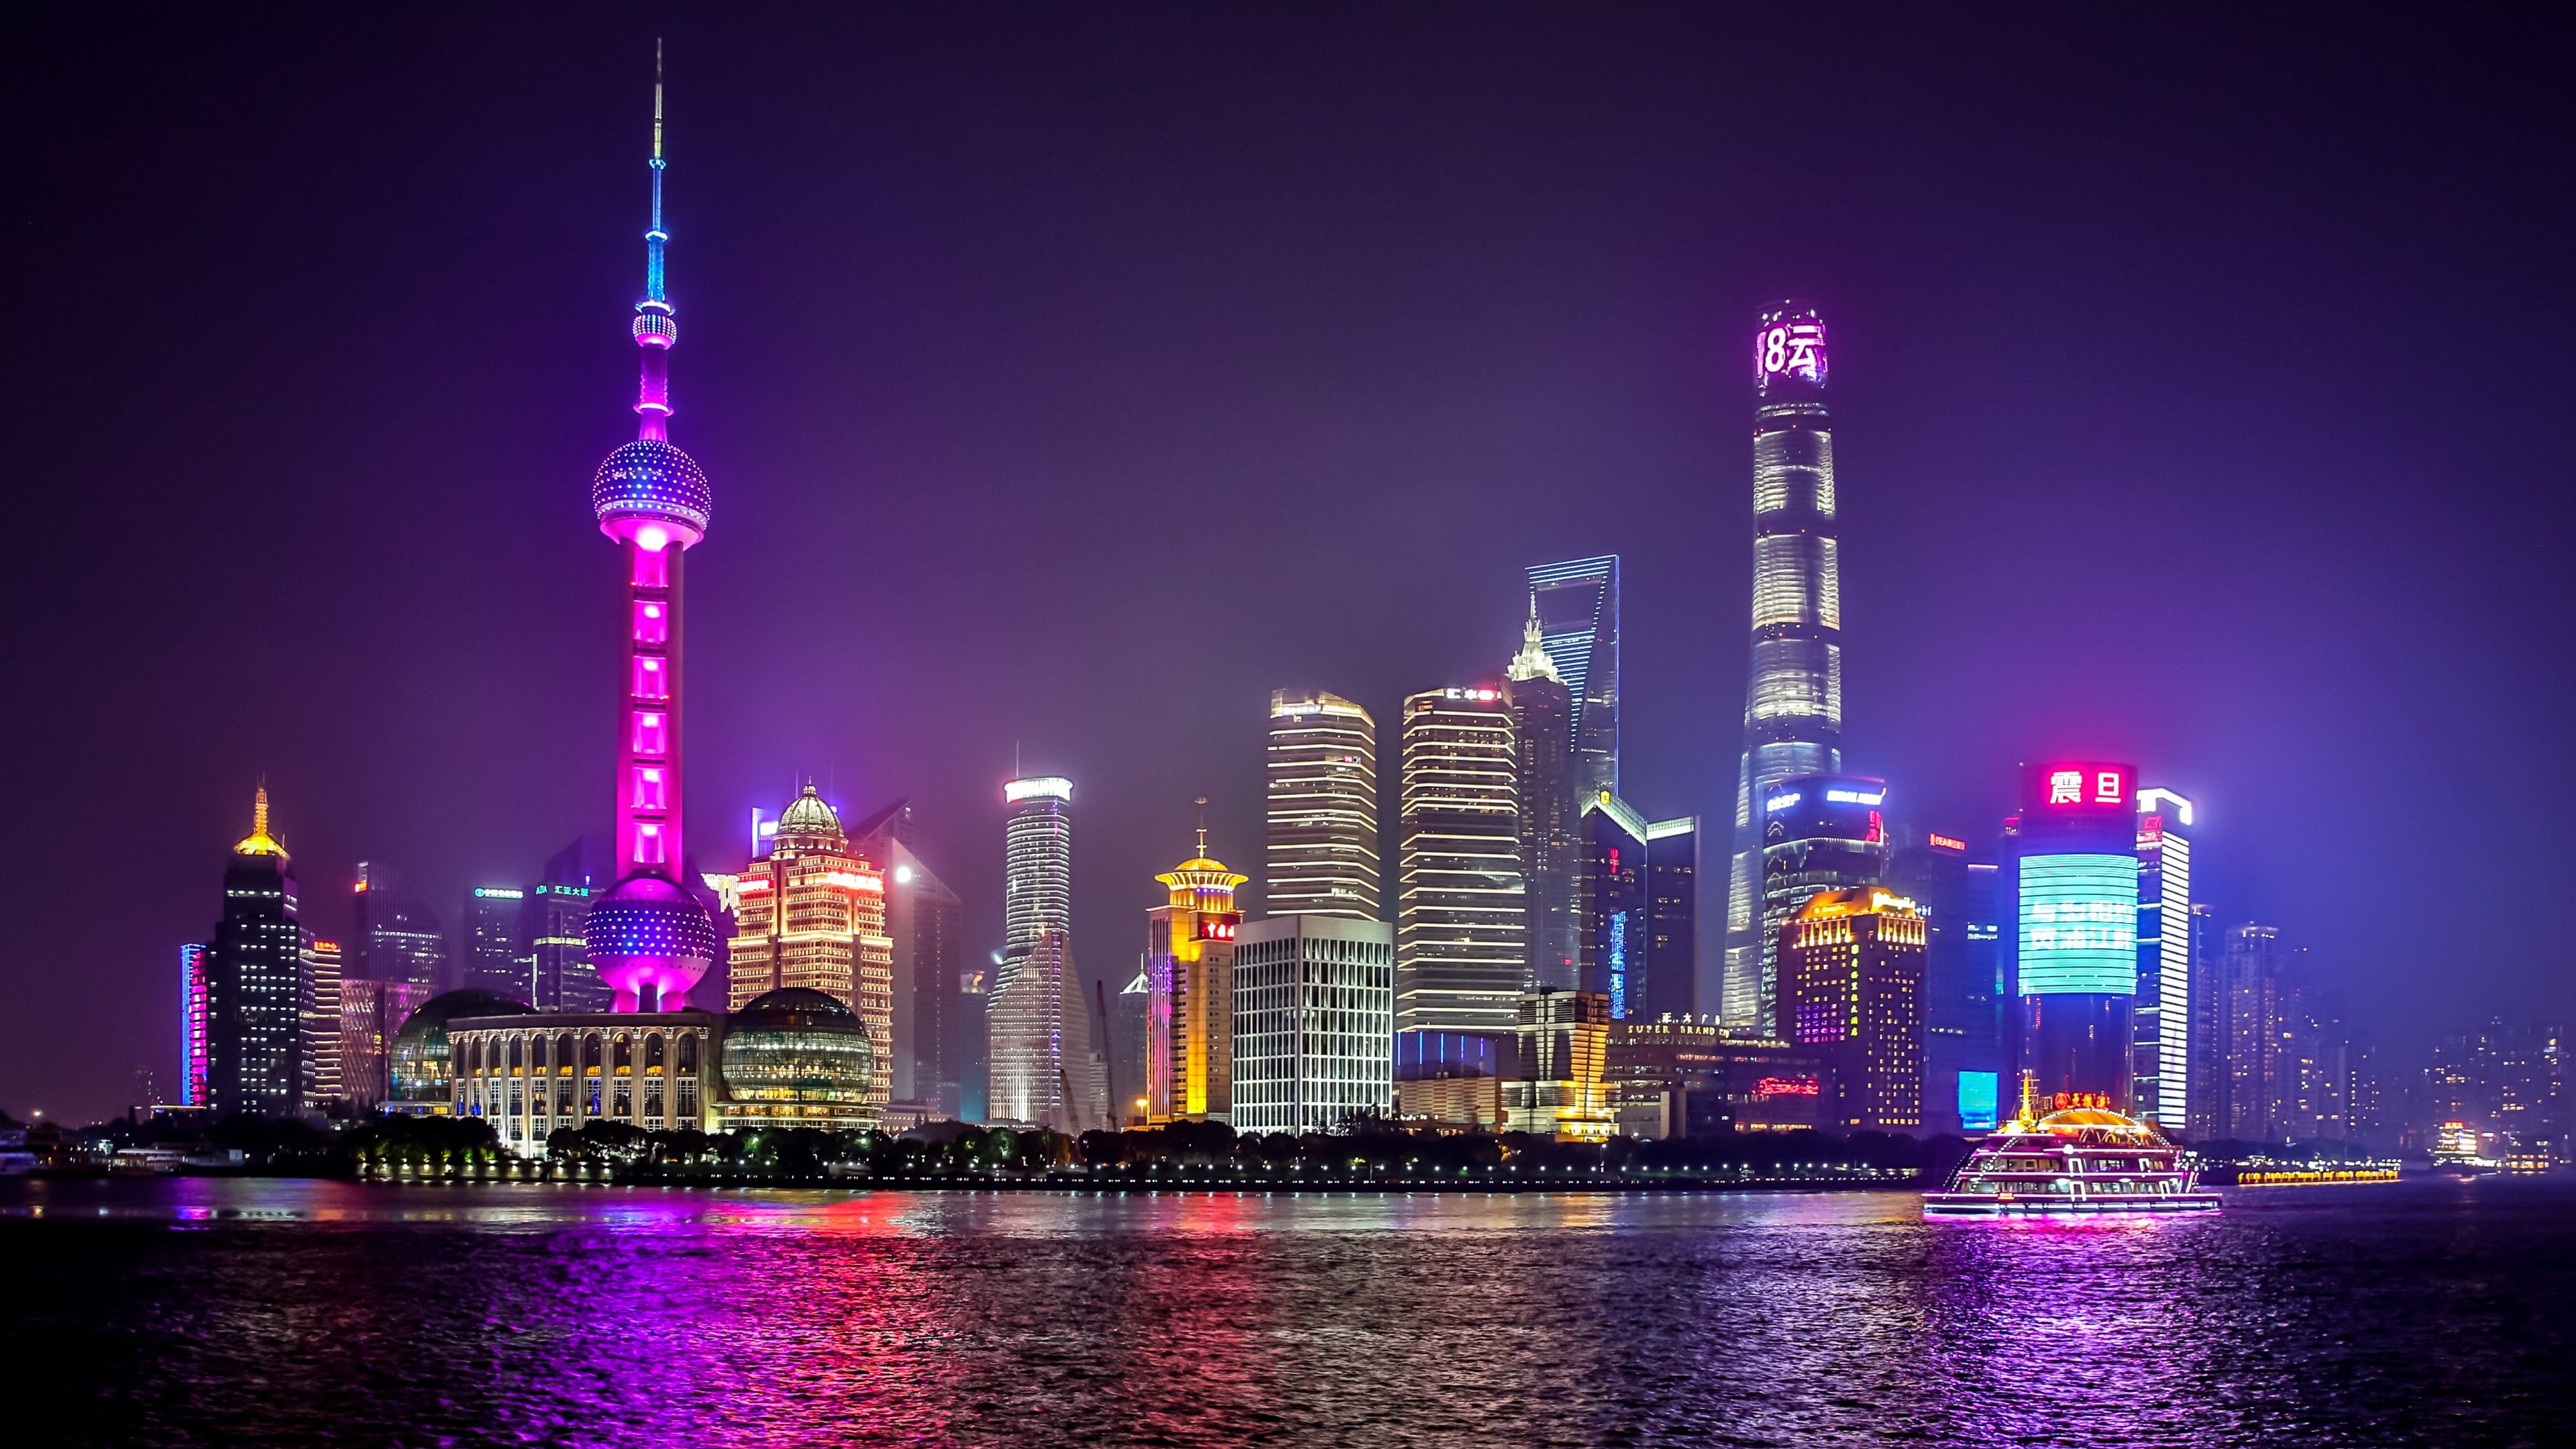 Shanghai City 4K Wallpaper, Body of Water, Reflection, Skyscrapers, Night life, Cityscape, Lights, World